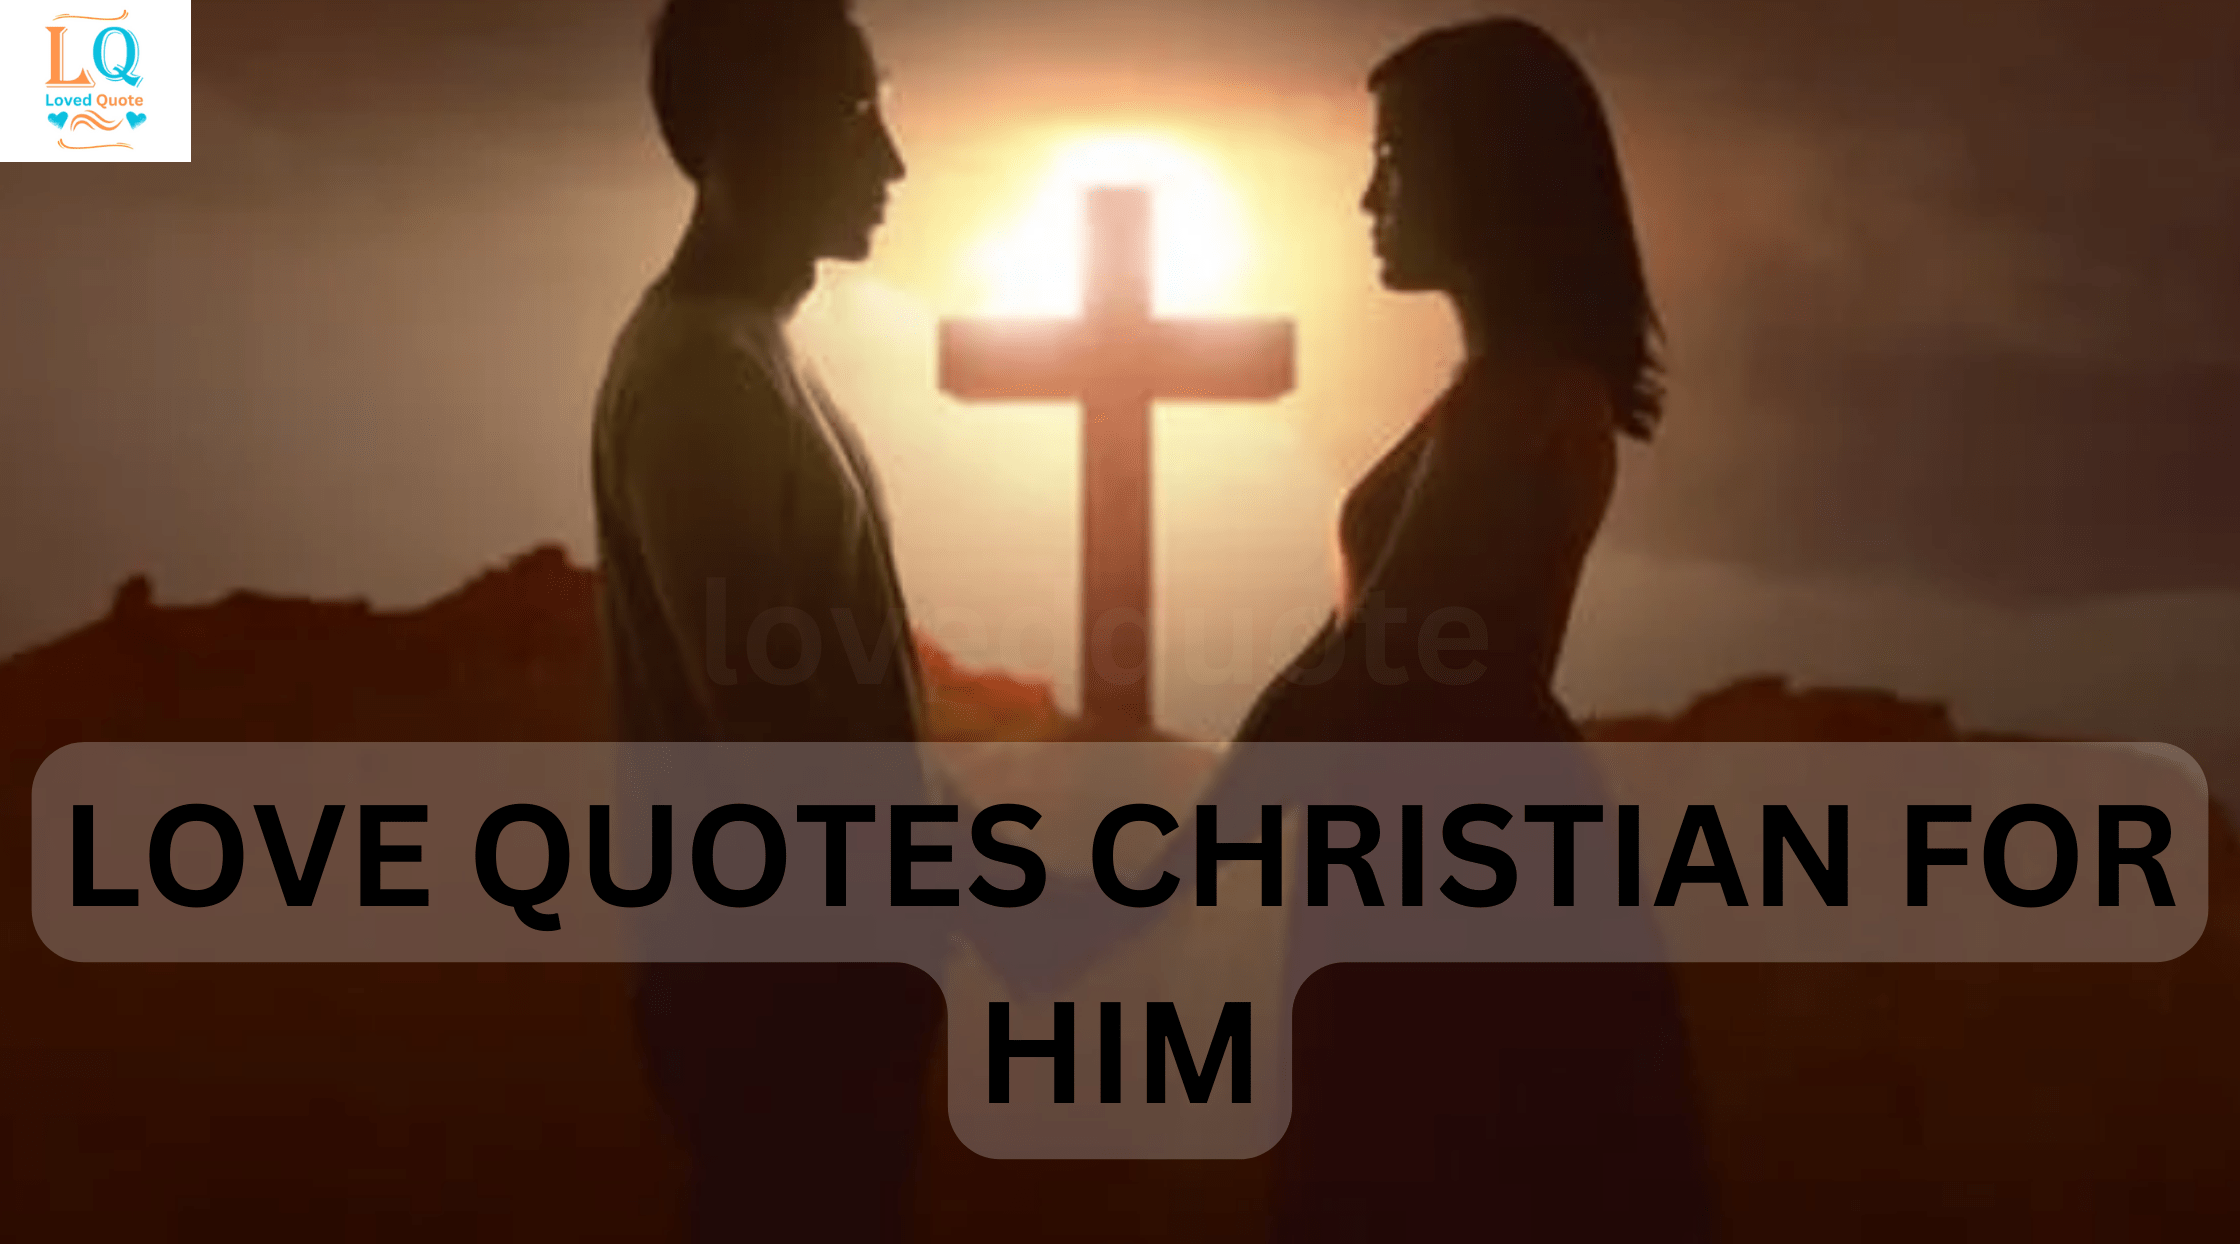 Love Quotes Christian for Him